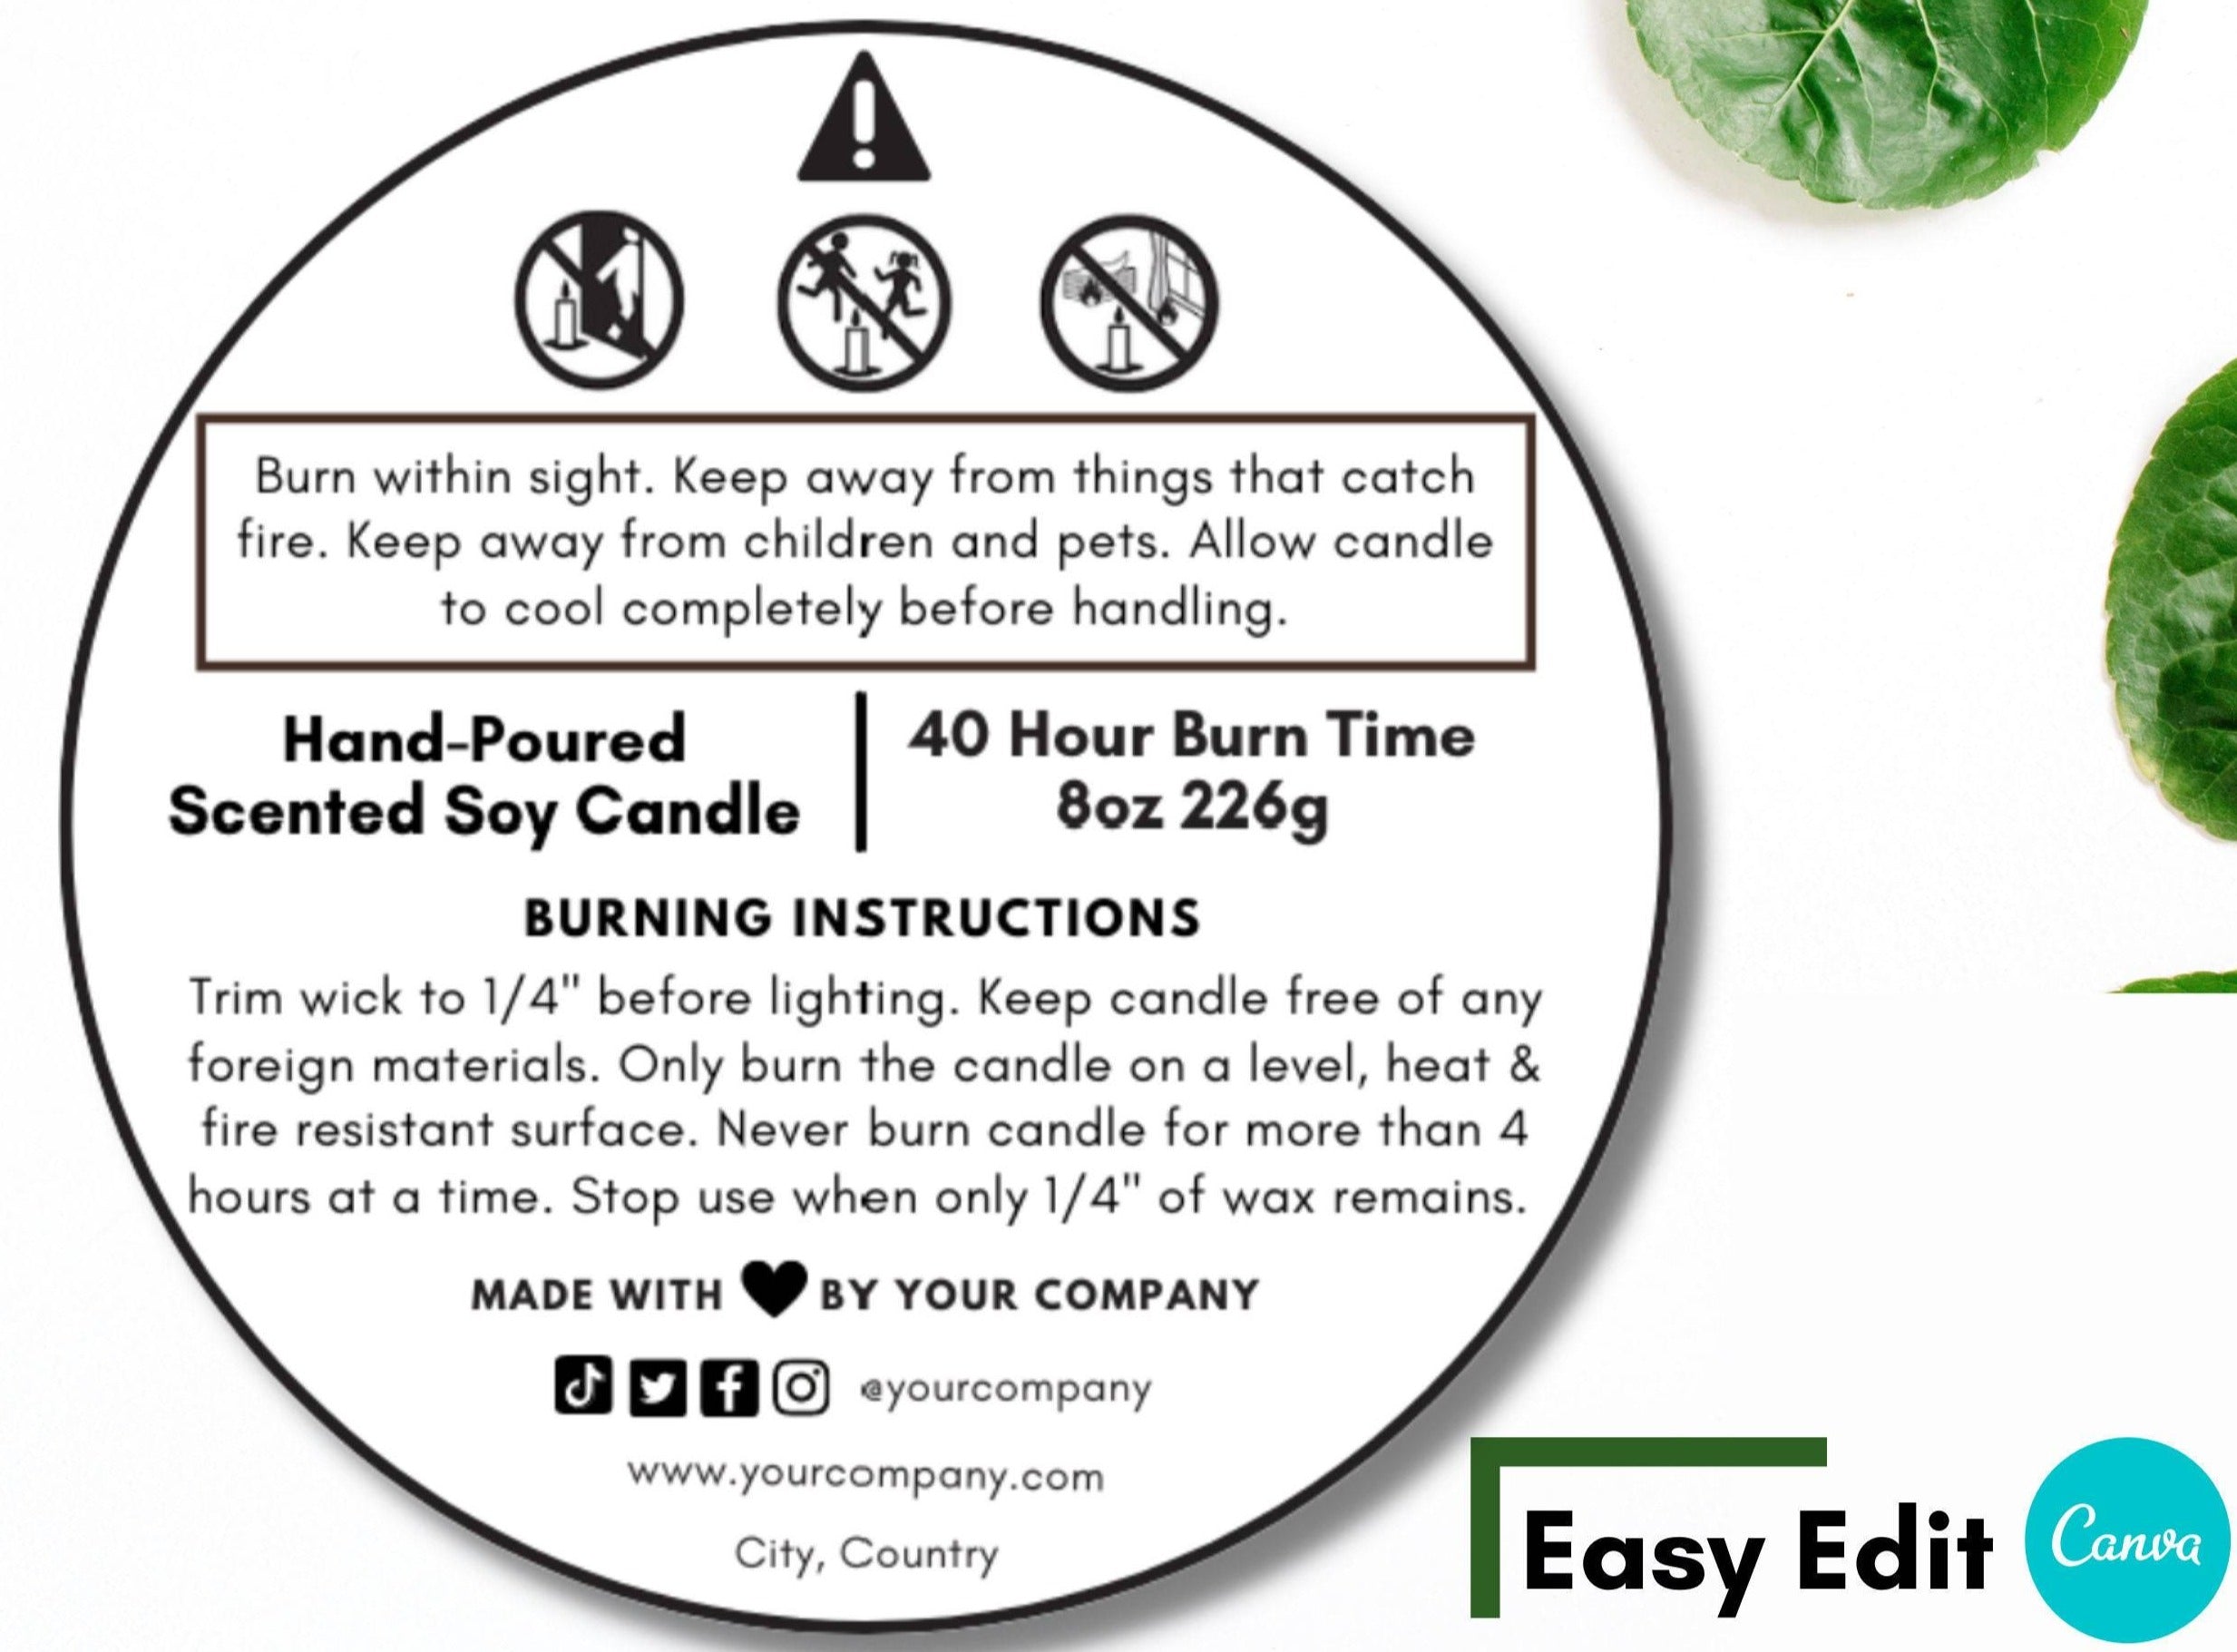 Editable Wax Melt Warning Label Template Care & Fire Safety Instructions